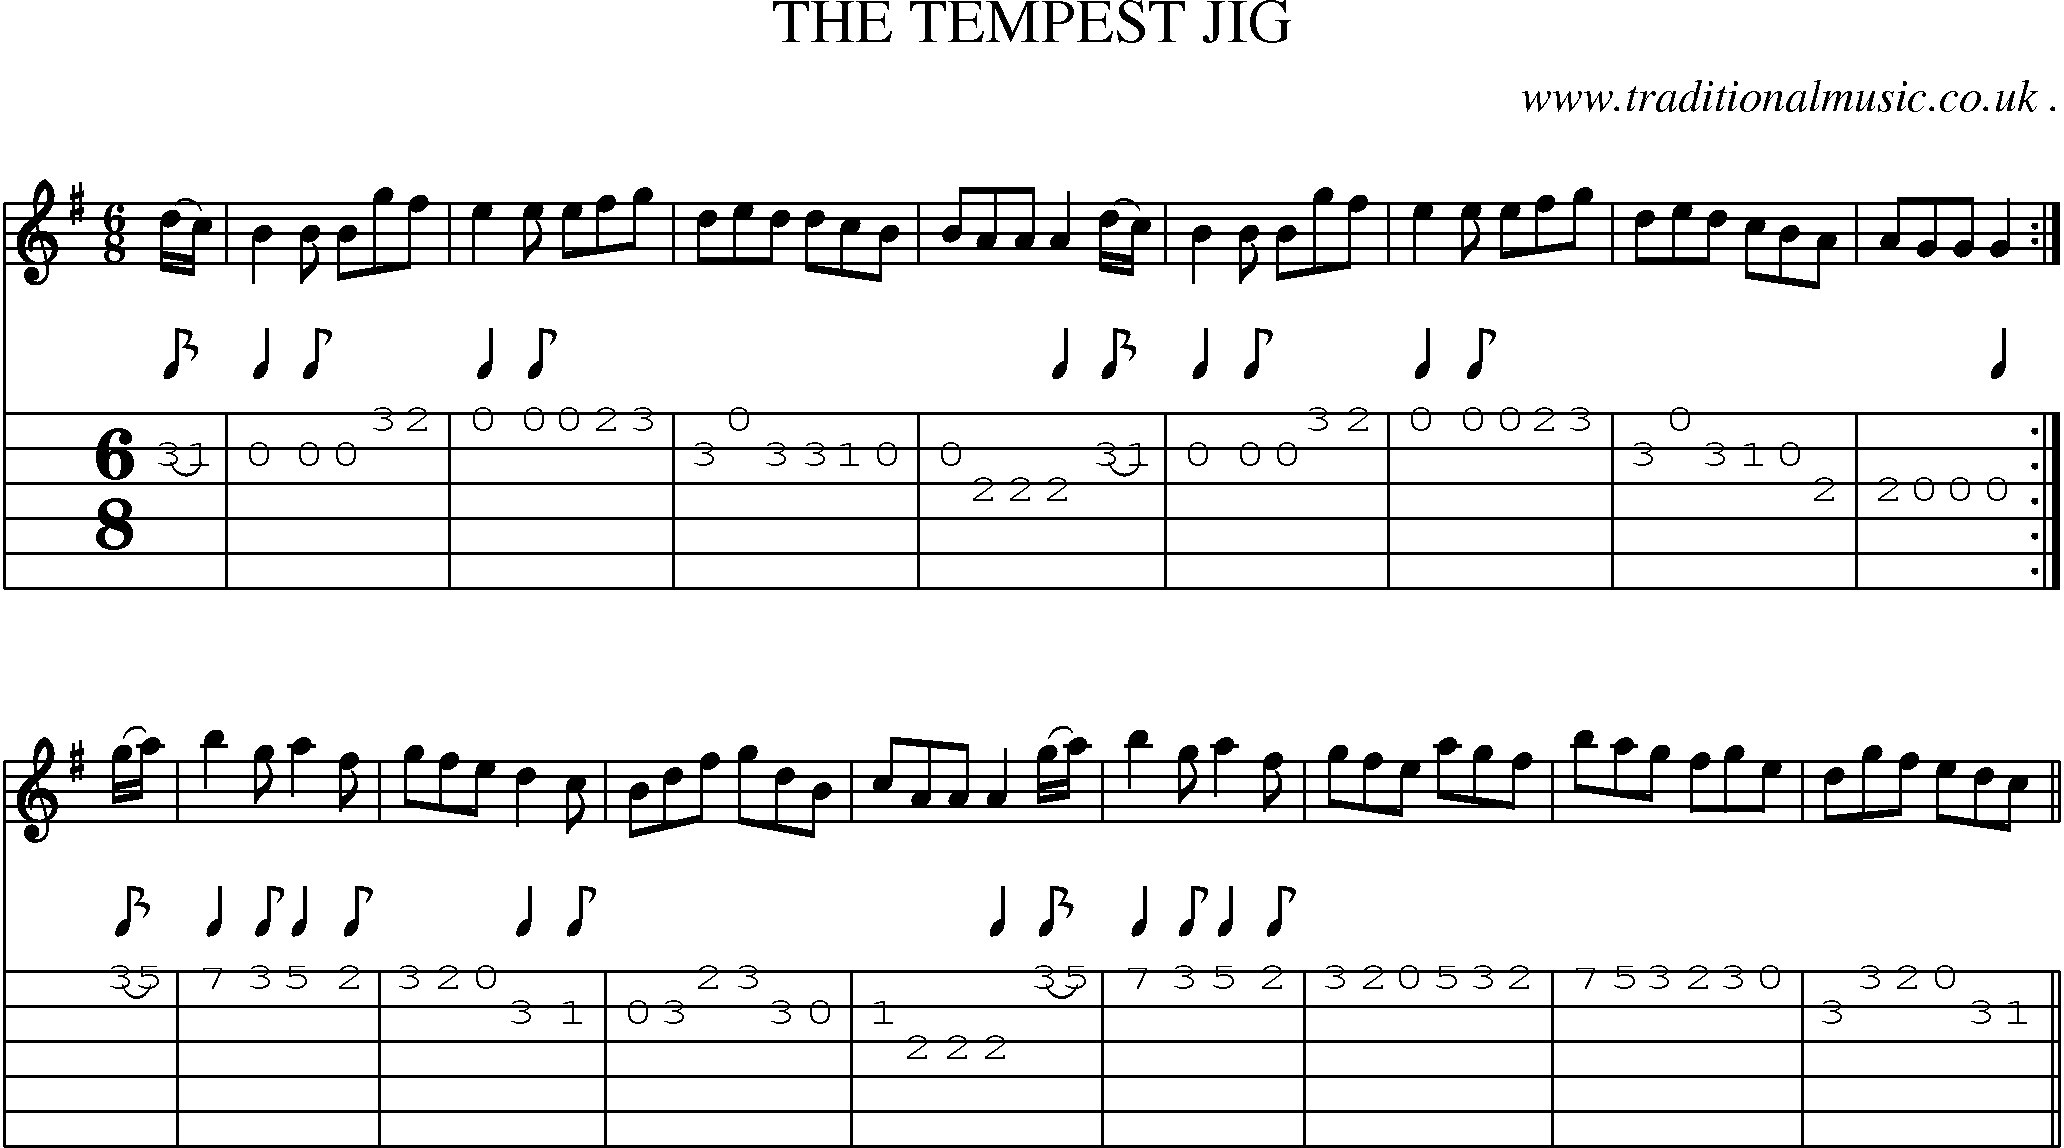 Sheet-Music and Guitar Tabs for The Tempest Jig